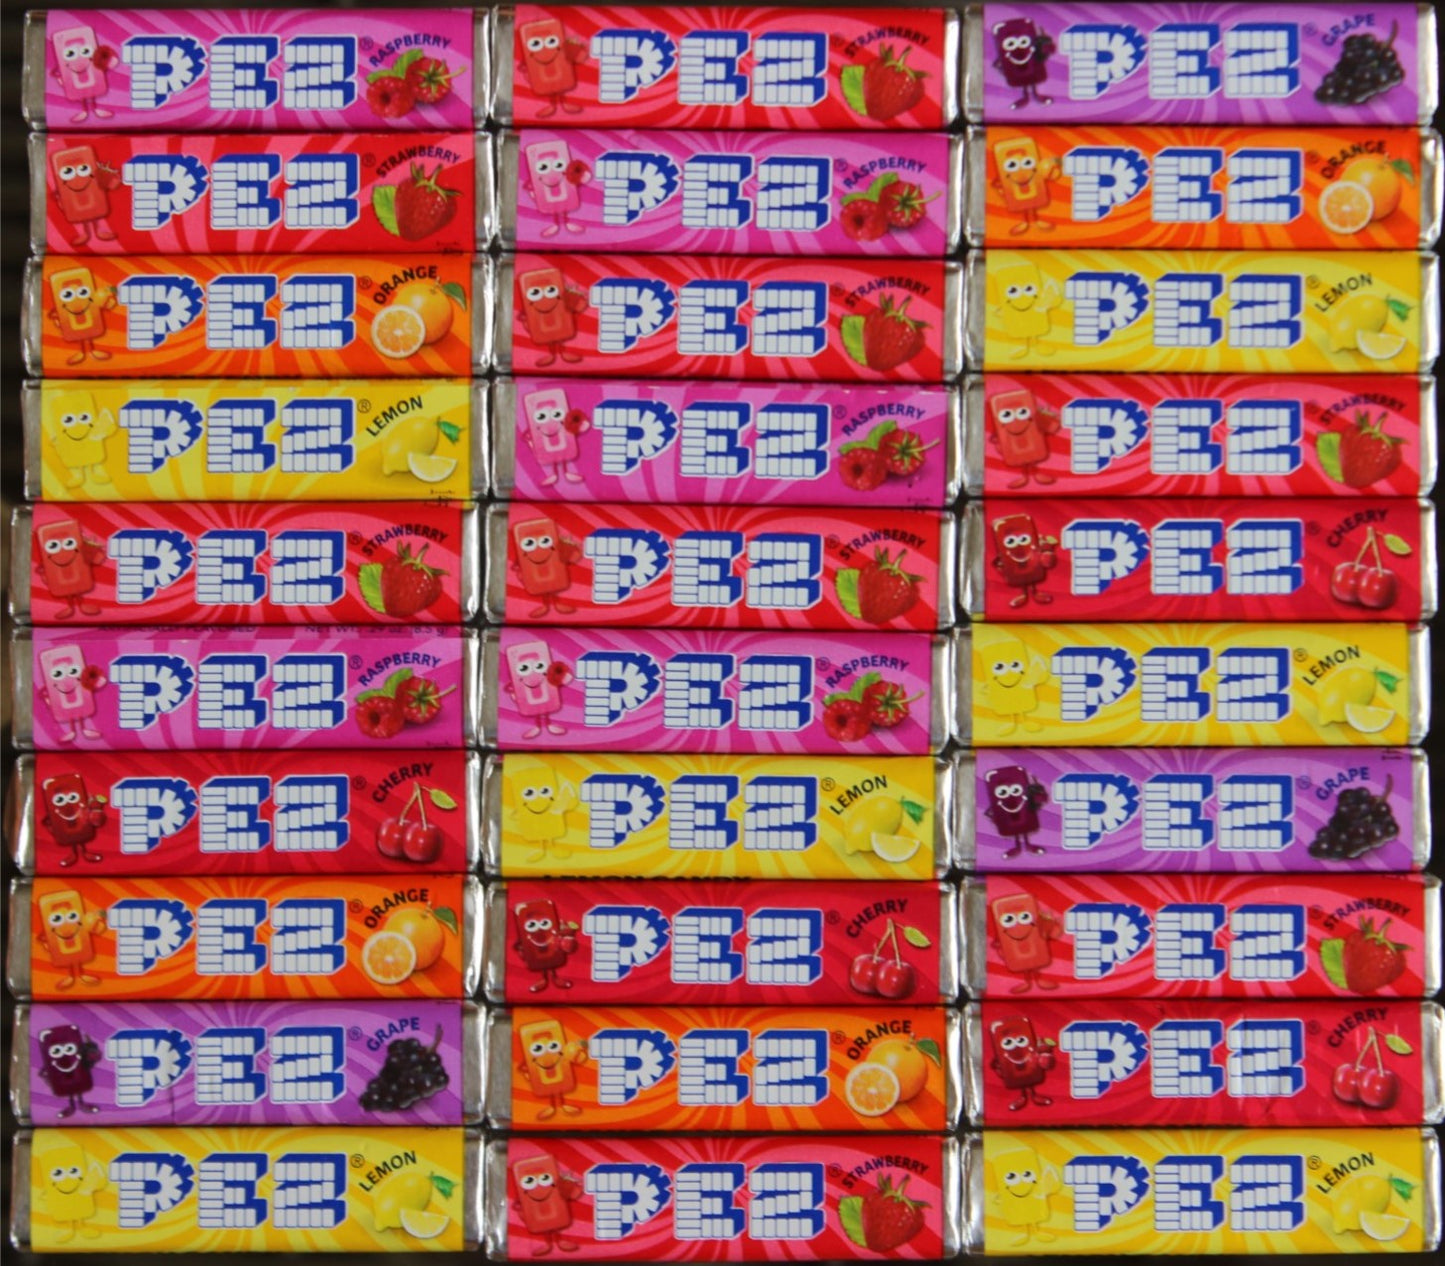 FRESH PEZ CANDY, BY THE POUND, ASSORTED (54 PACKS = 648 PIECES!) (No International Buyers, Please)